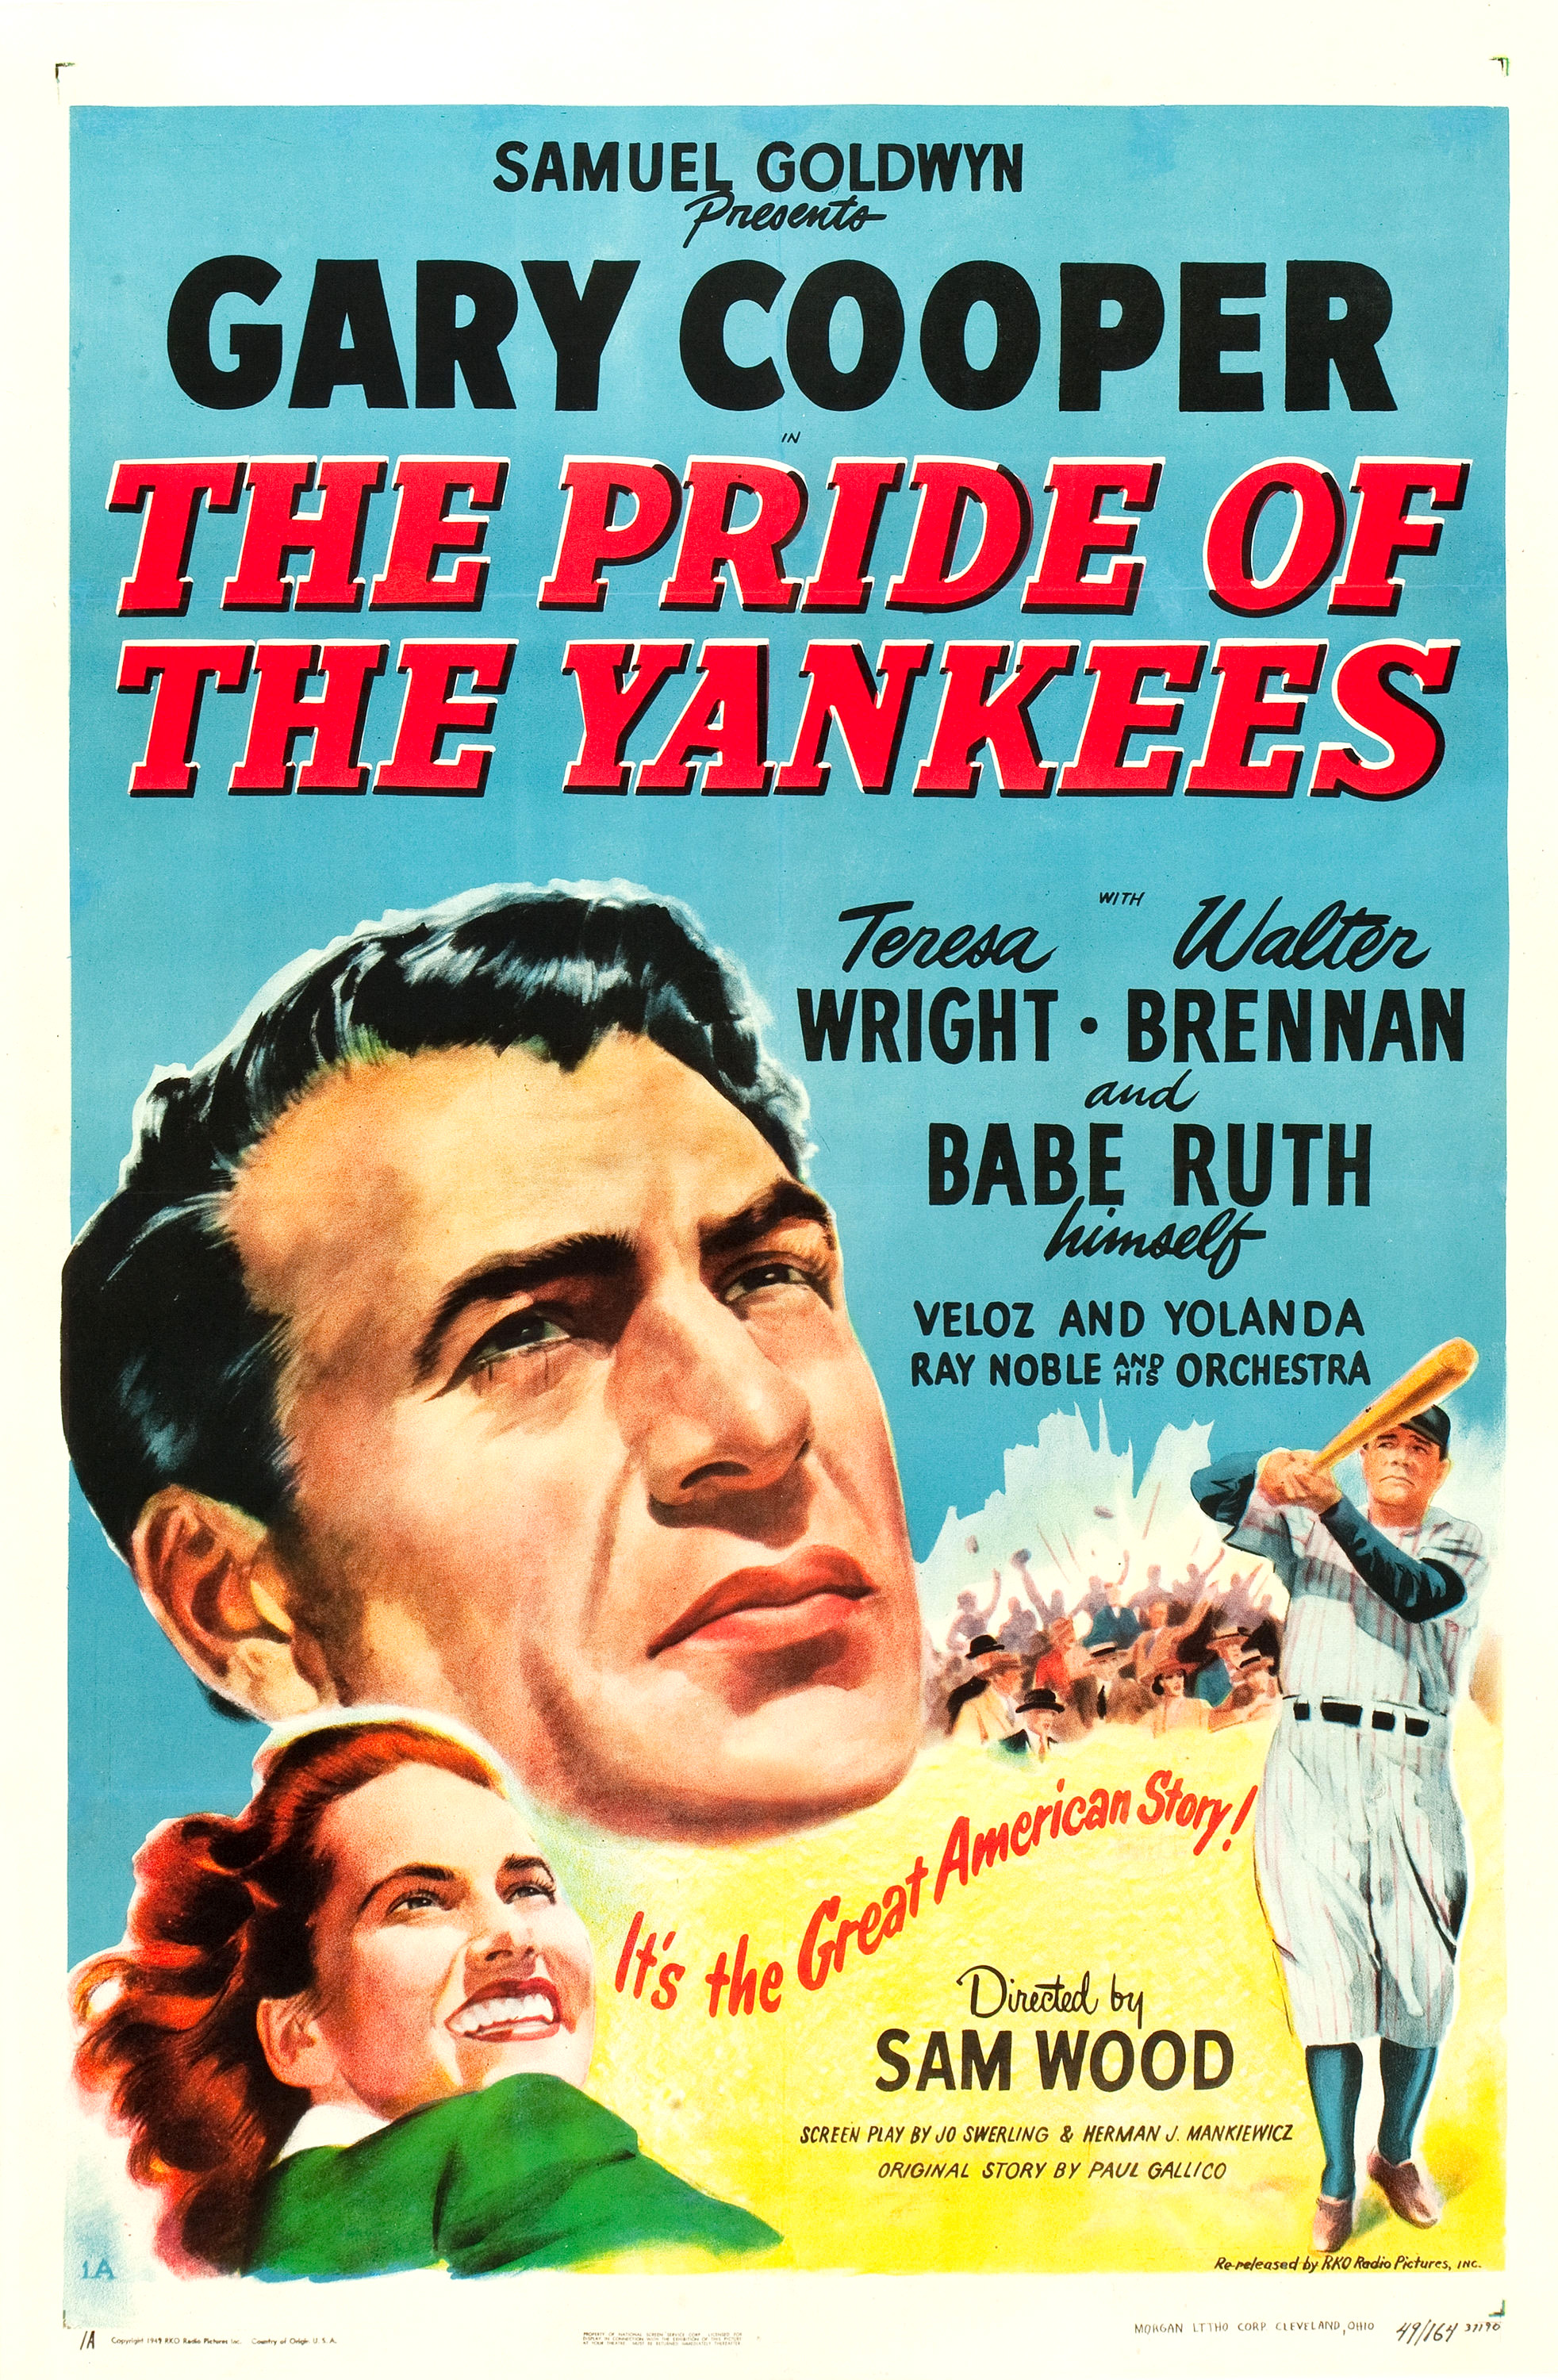  New York Yankees 2009: Season of Pride, Tradition and Glory :  Movies & TV